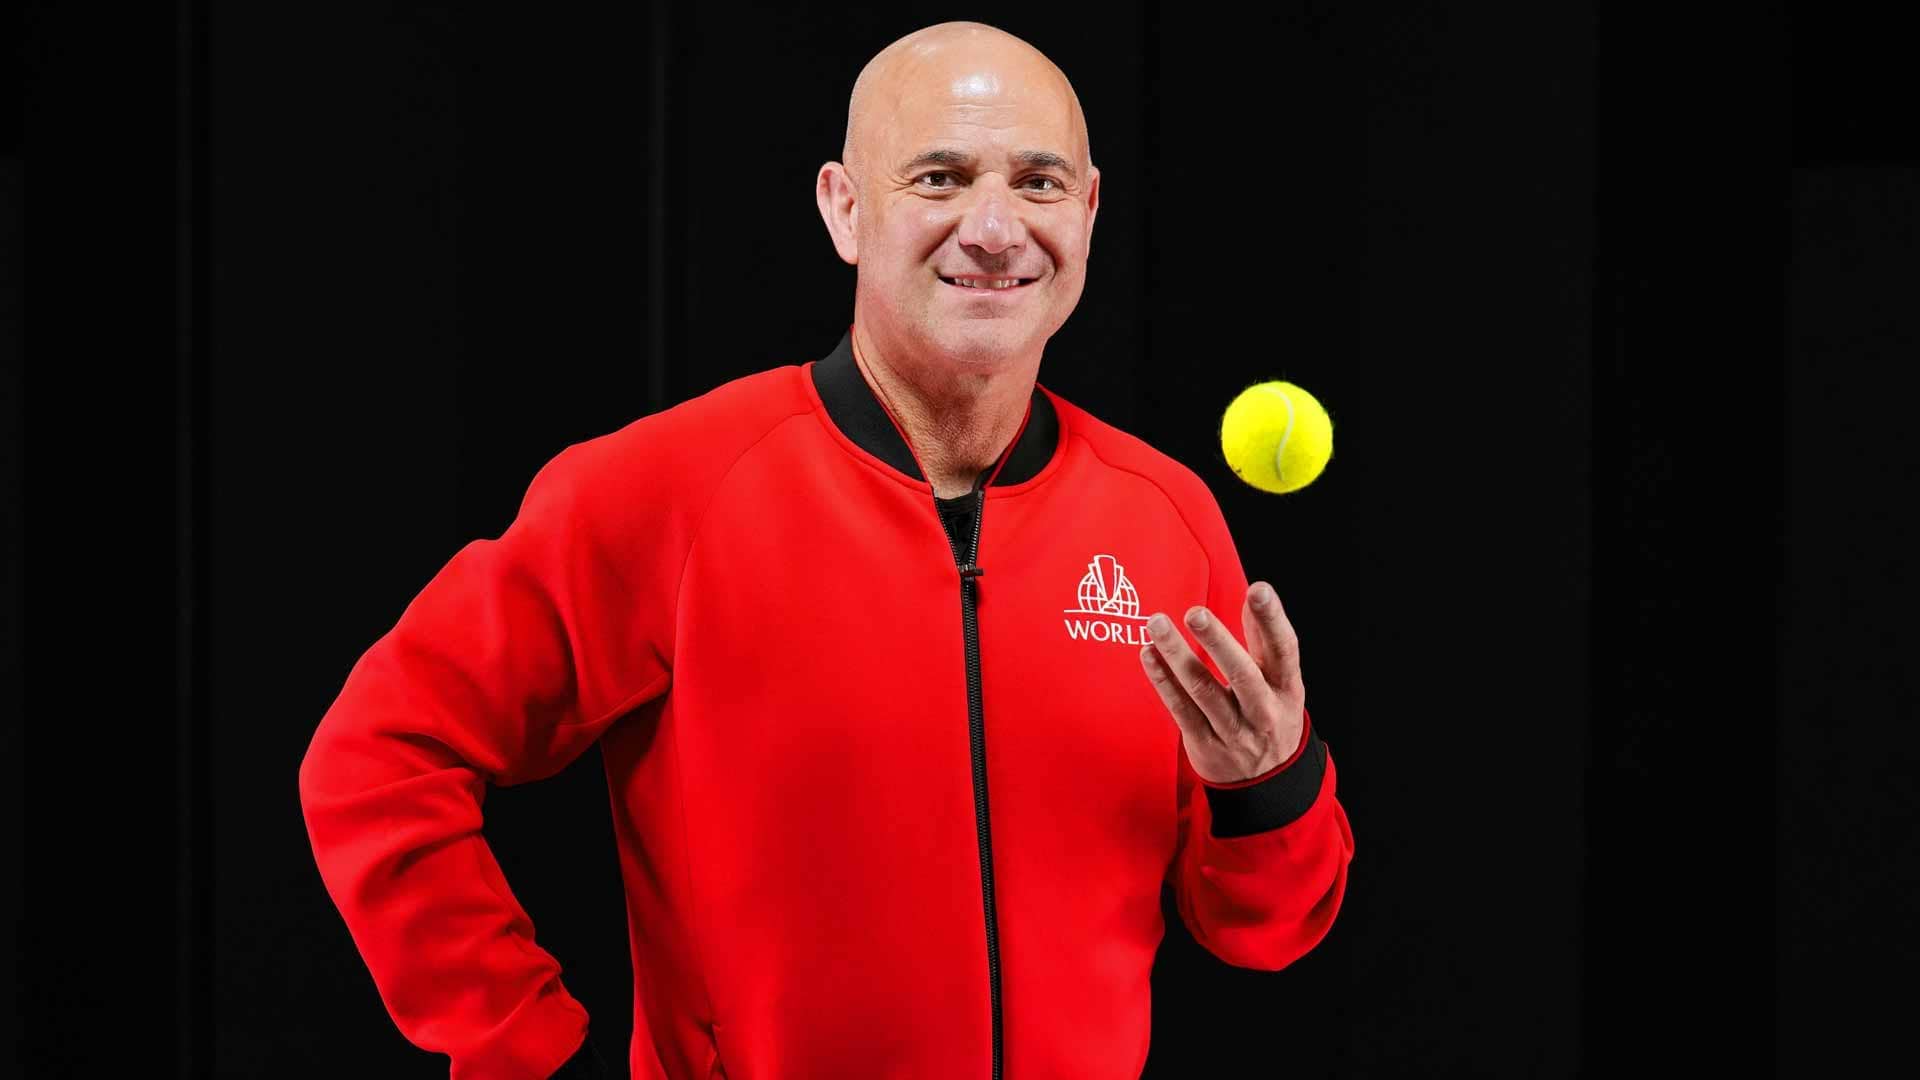 Agassi to become Team World Captain for Laver Cup in 2025